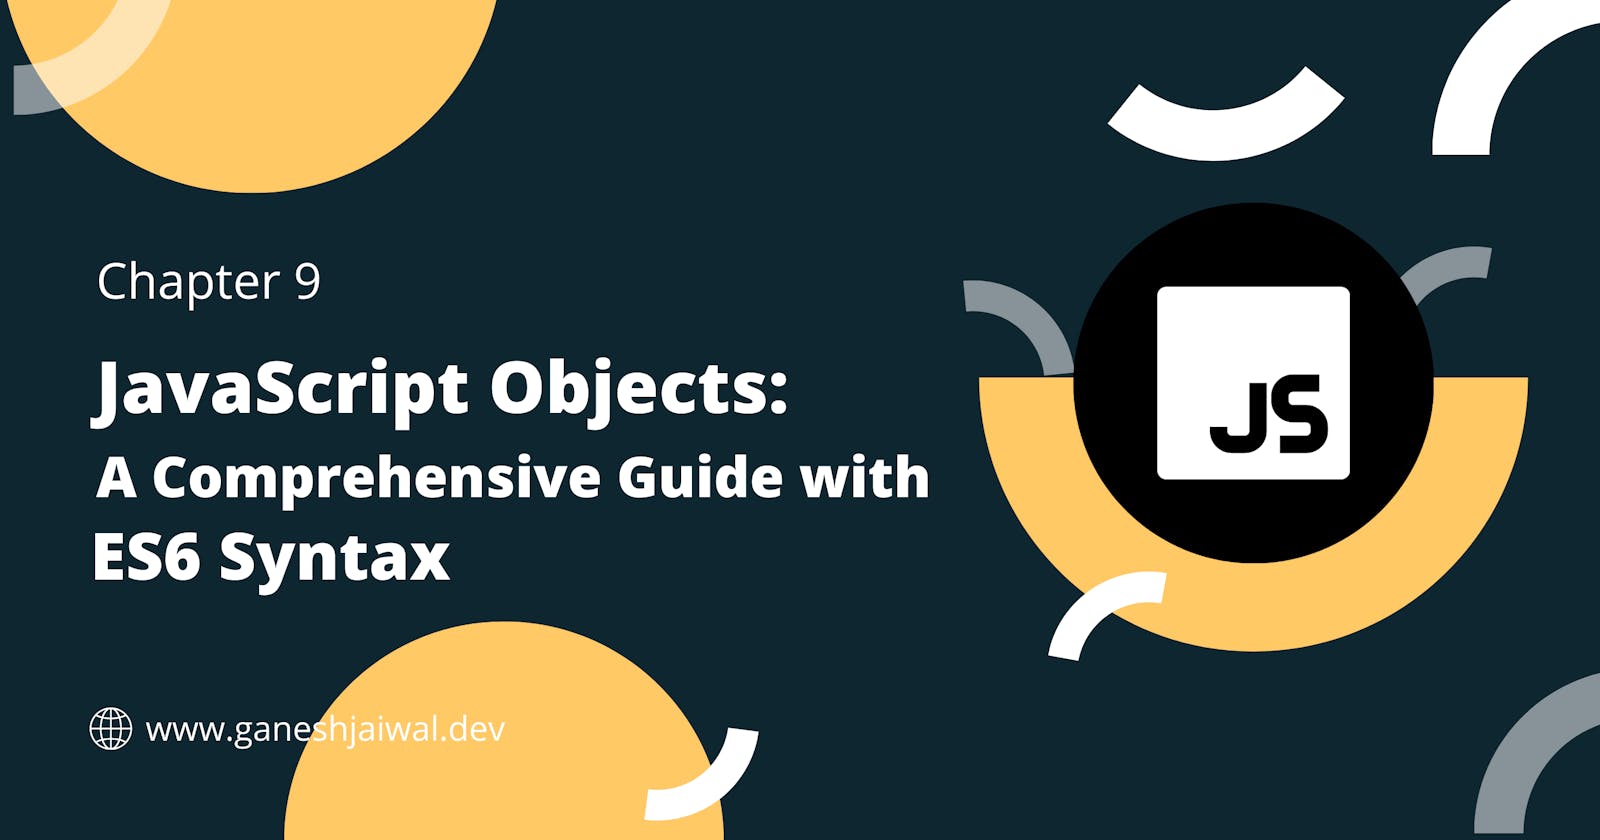 JavaScript Objects: A Comprehensive Guide with ES6 Syntax